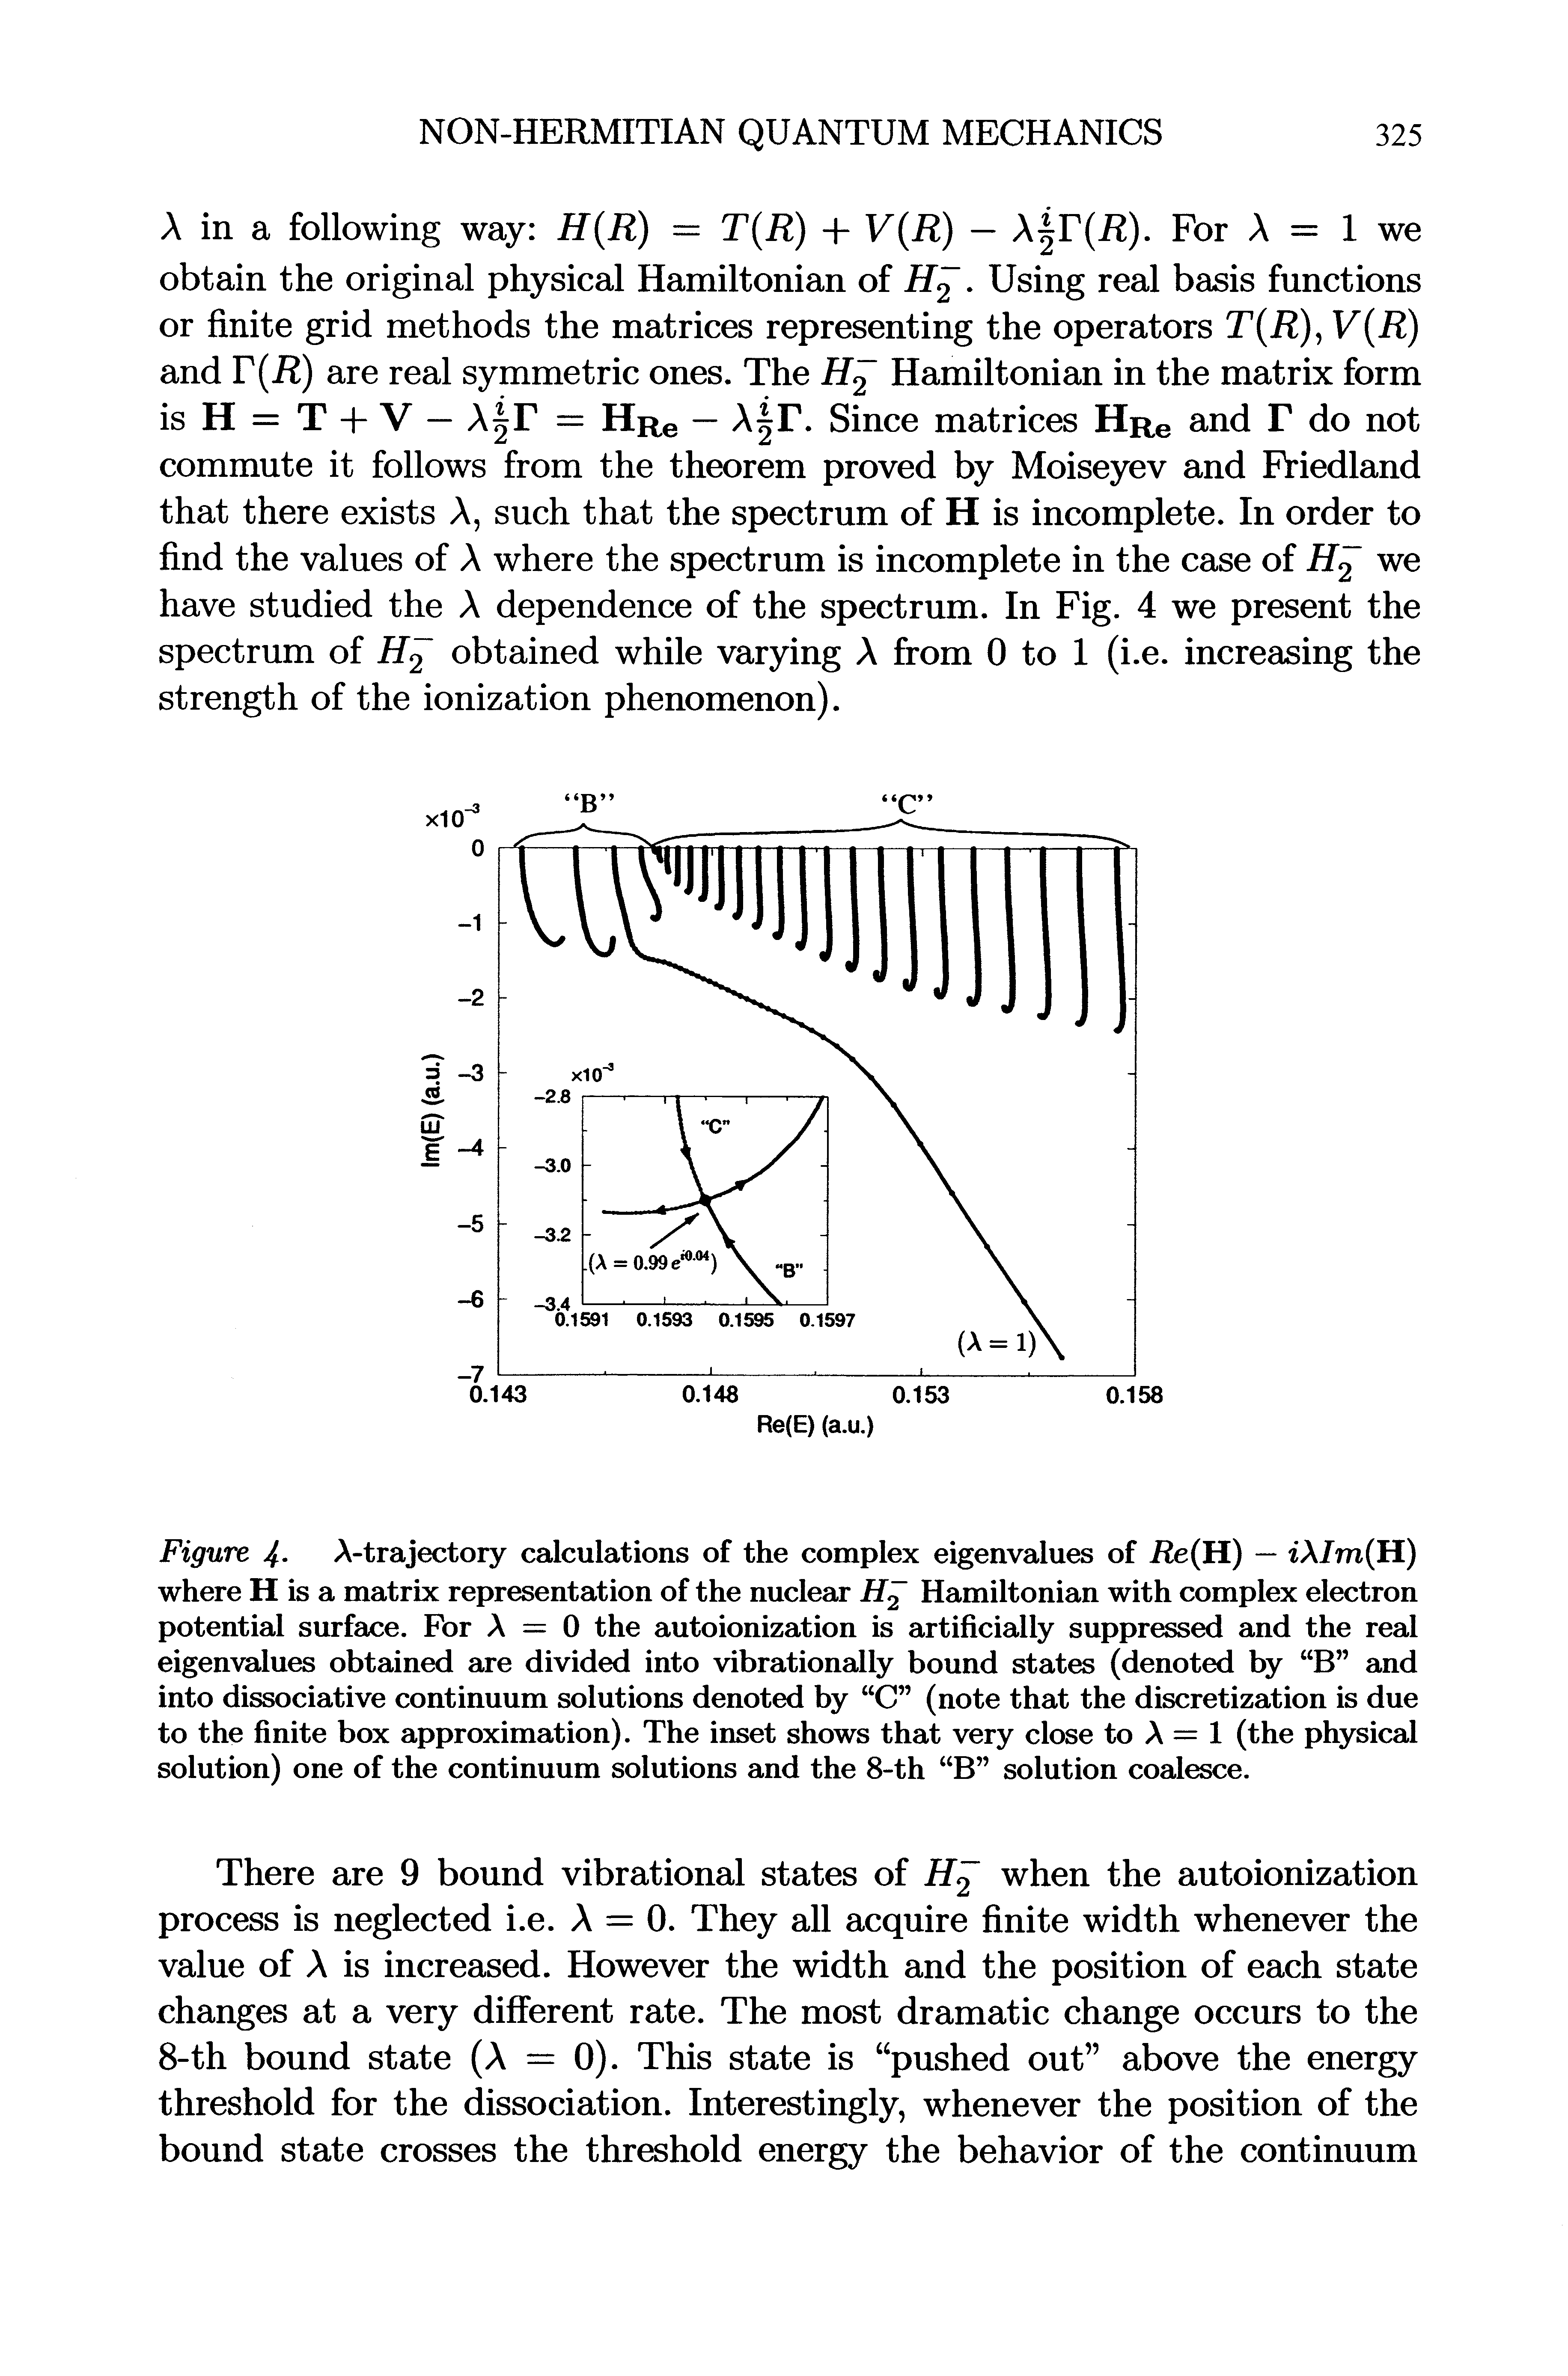 Figure 4- A-trajectory calculations of the complex eigenvalues of Re H) — tA/m(H) where H is a matrix representation of the nuclear Hamiltonian with complex electron potential surface. For A = 0 the autoionization is artificially suppressed and the real eigenvalues obtained are divided into vibrationally bound states (denoted by B and into dissociative continuum solutions denoted by C (note that the discretization is due to the finite box approximation). The inset shows that very close to A = 1 (the physical solution) one of the continuum solutions and the 8-th B solution coalesce.